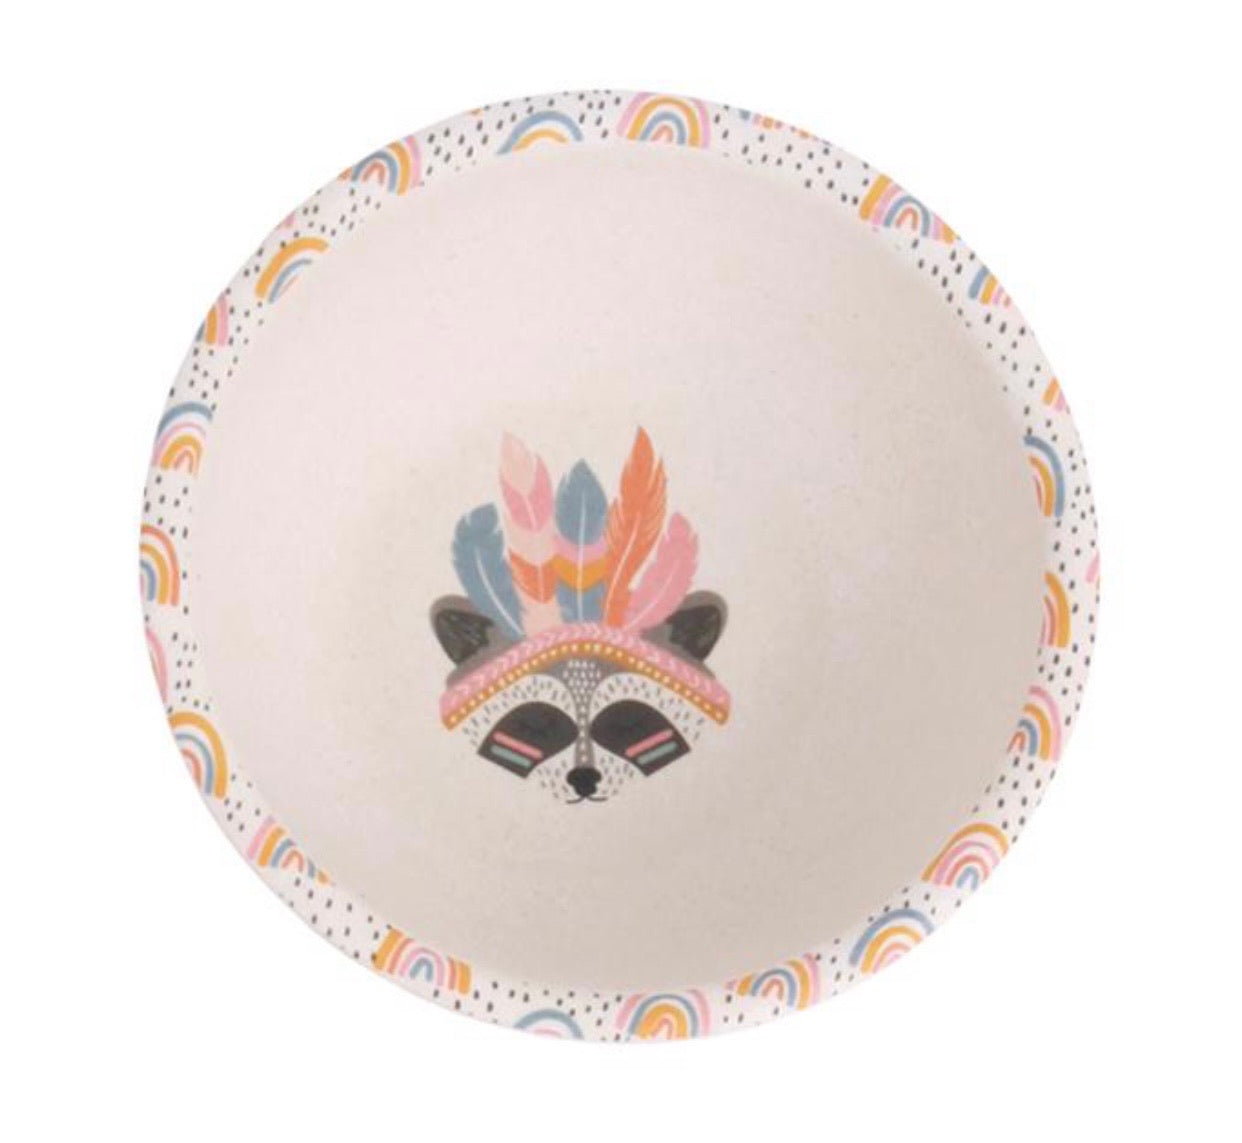 Love Mae - Divided Plate Set - Gypsy Girl